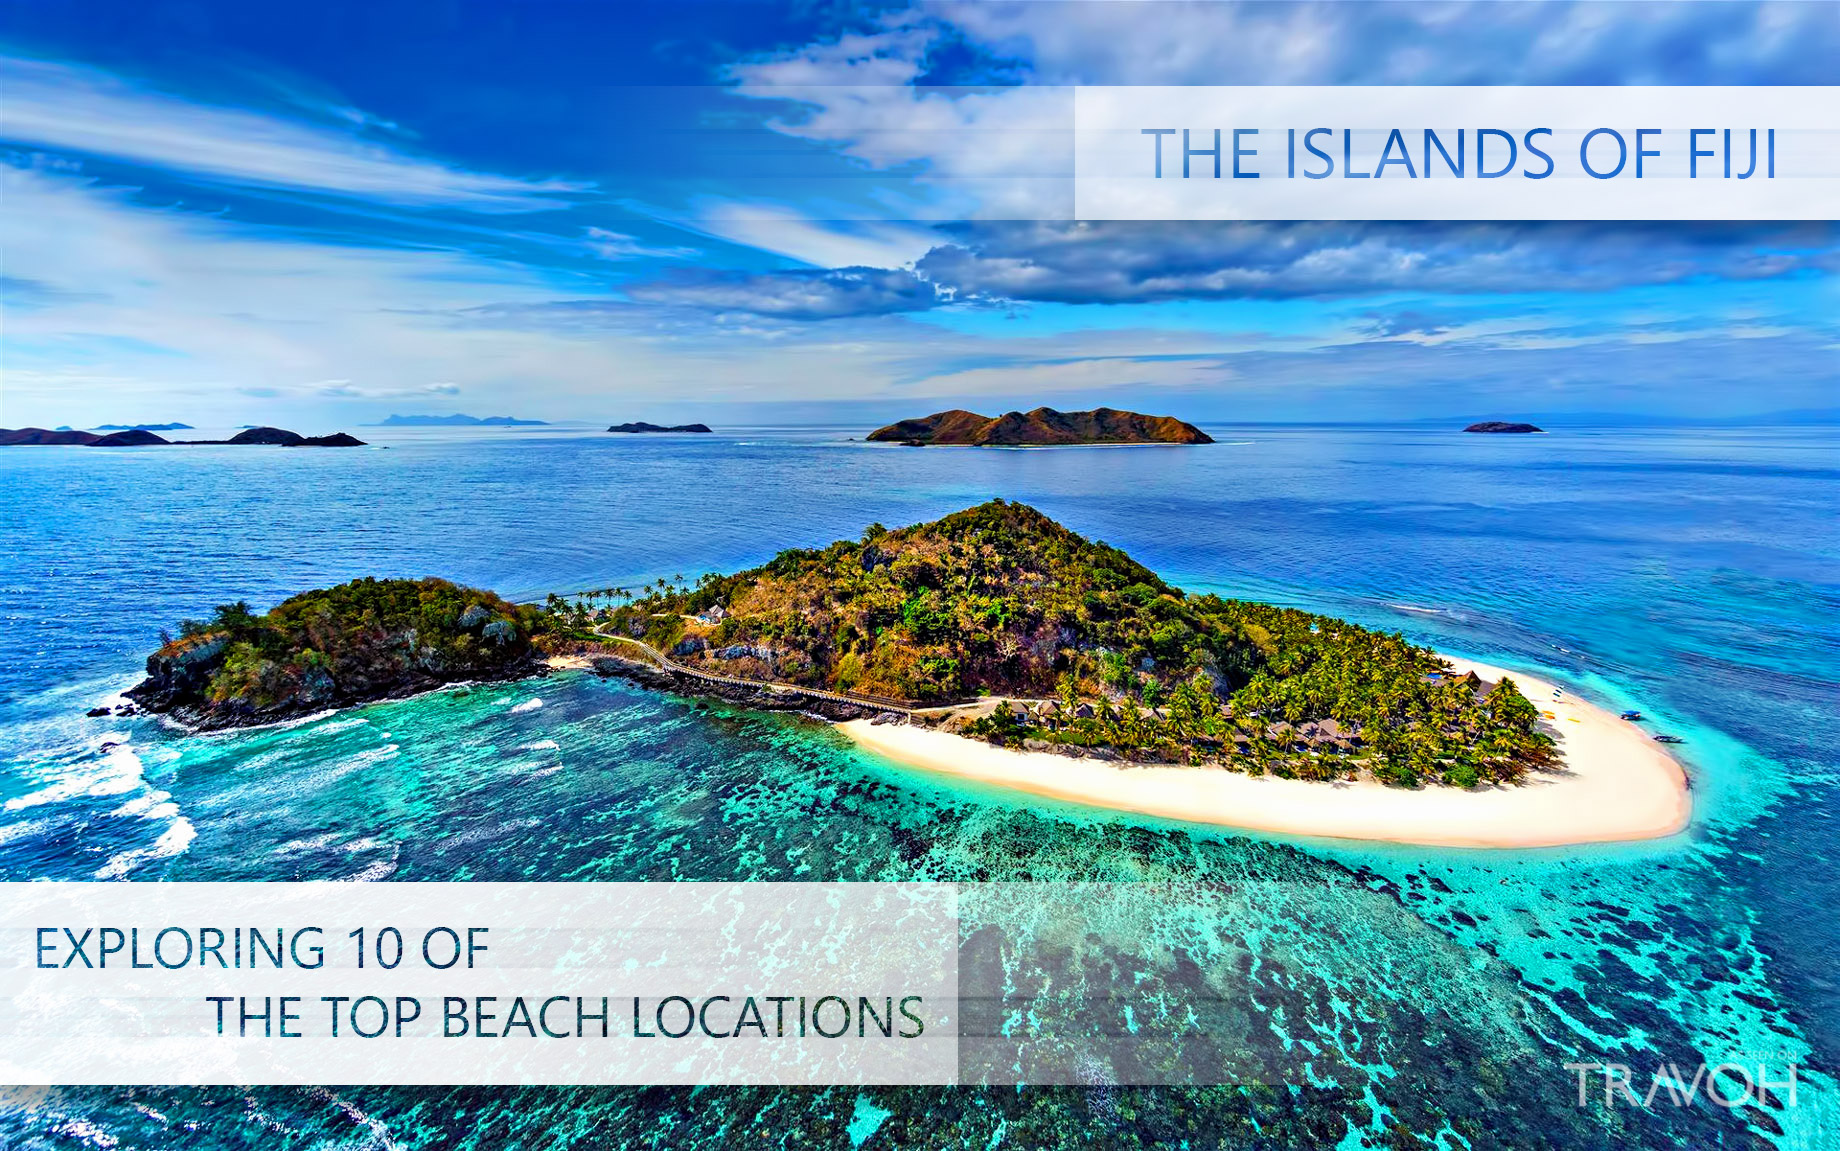 Exploring 10 of the Top Beach Locations on the Islands of Fiji